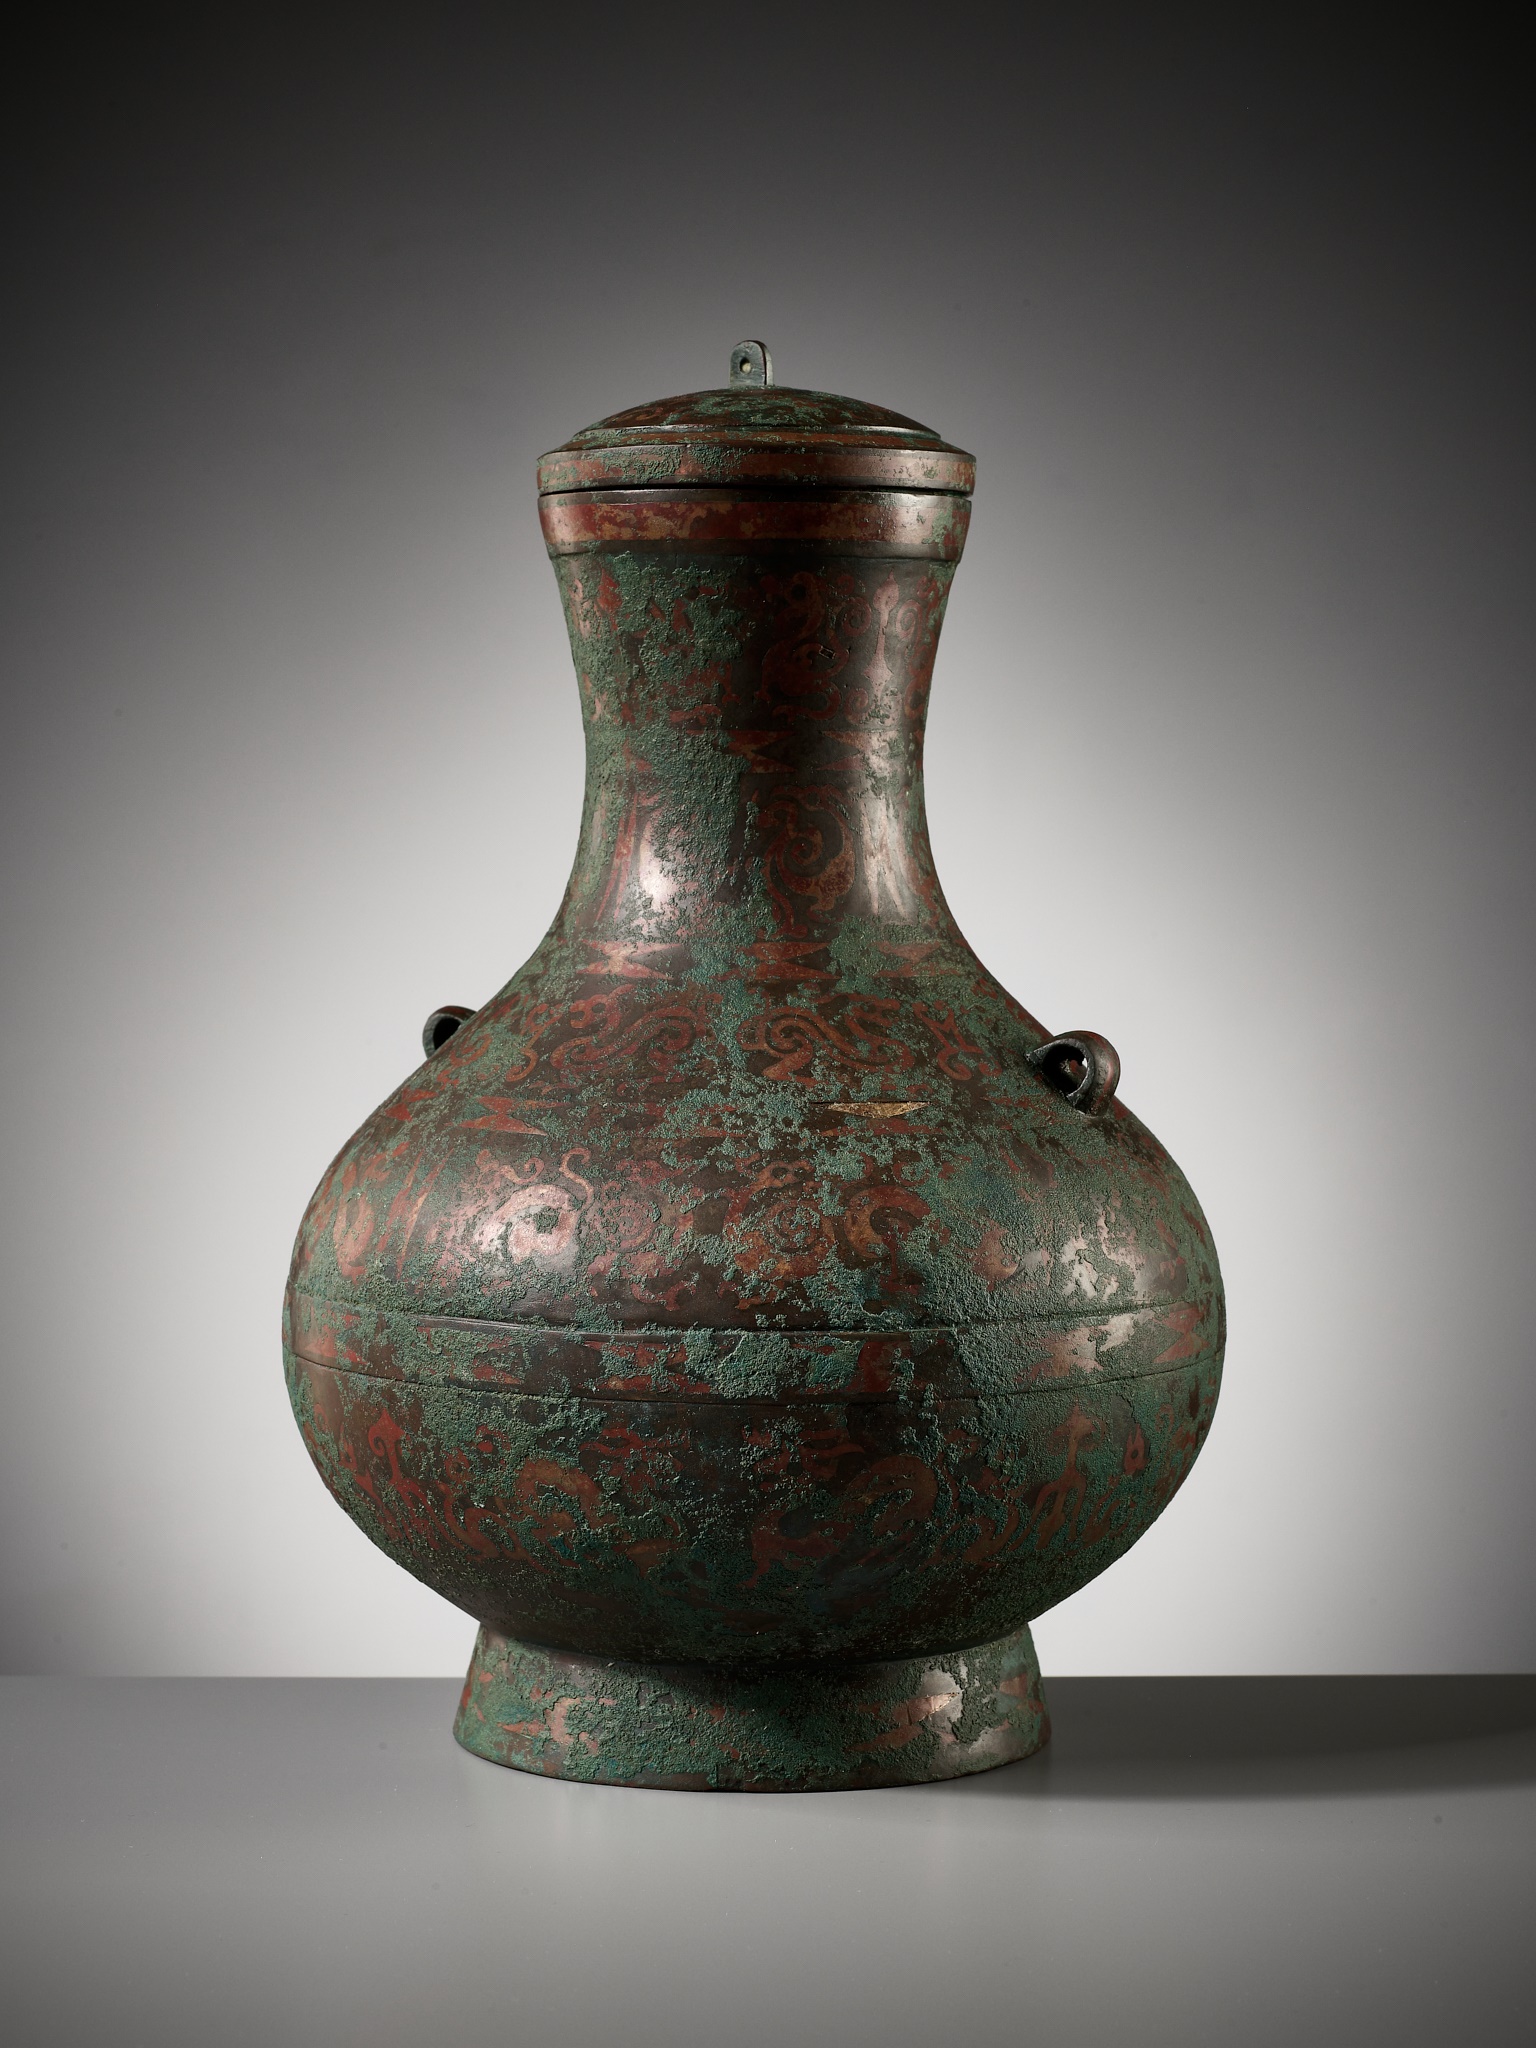 A COPPER-INLAID BRONZE RITUAL WINE VESSEL AND COVER, HU, EASTERN ZHOU DYNASTY - Image 10 of 27